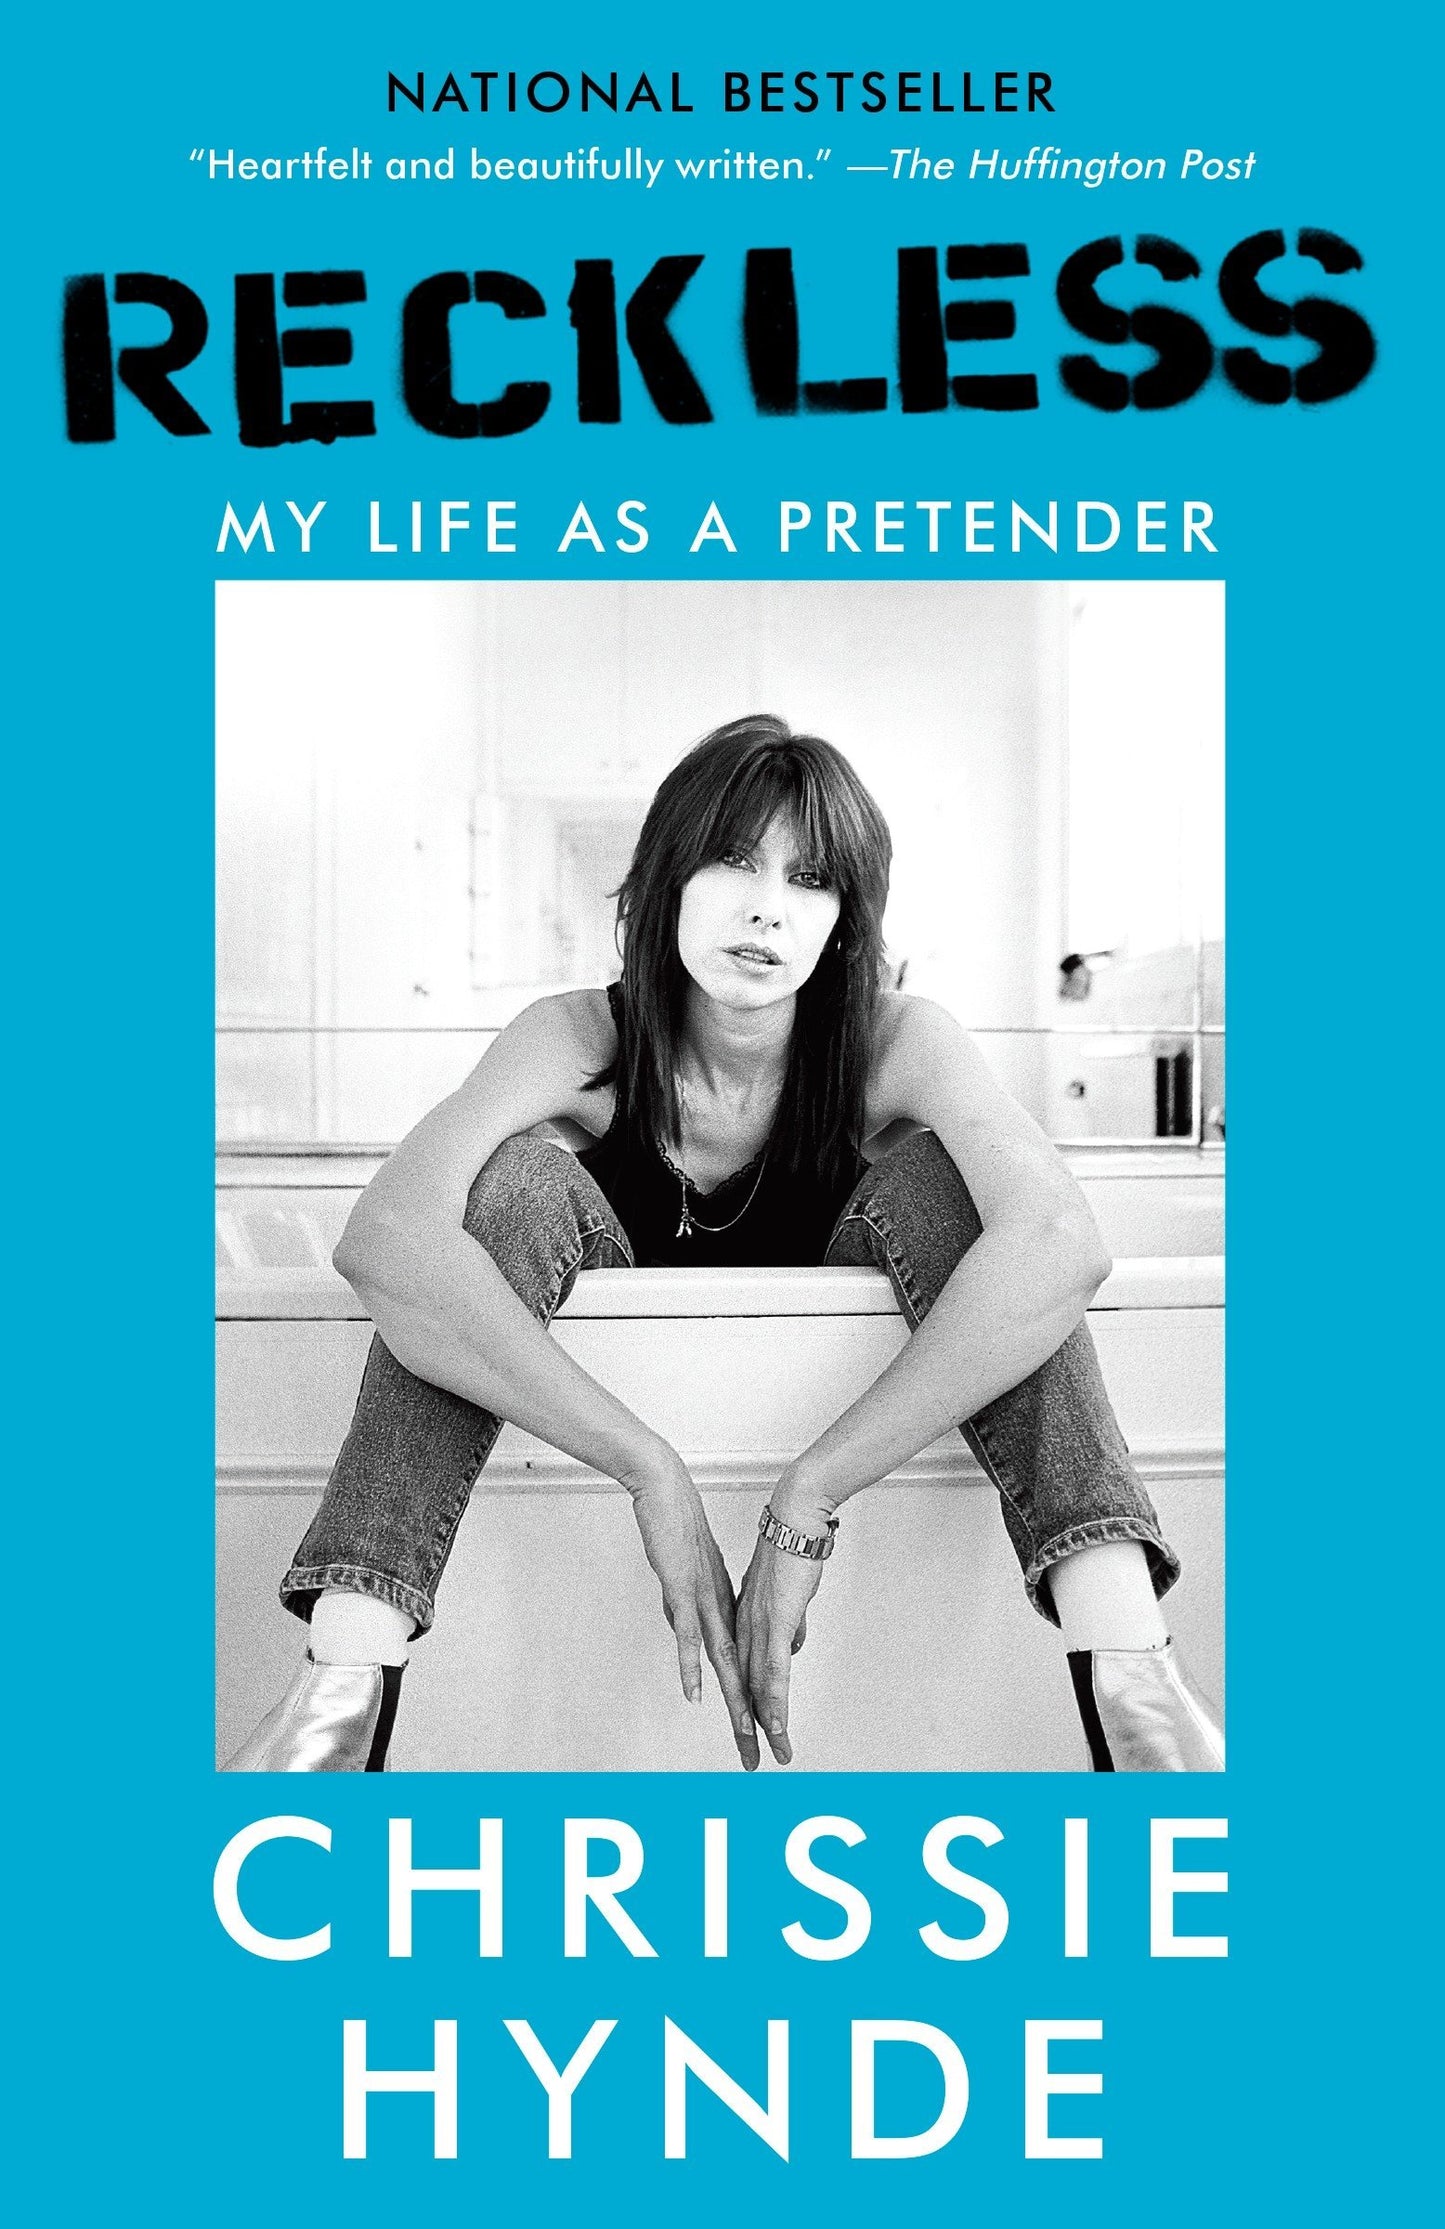 THE PRETENDERS - CHRISSIE HYNDE - RECKLESS: MY LIFE AS A PRETENDER - PAPERBACK - BOOK